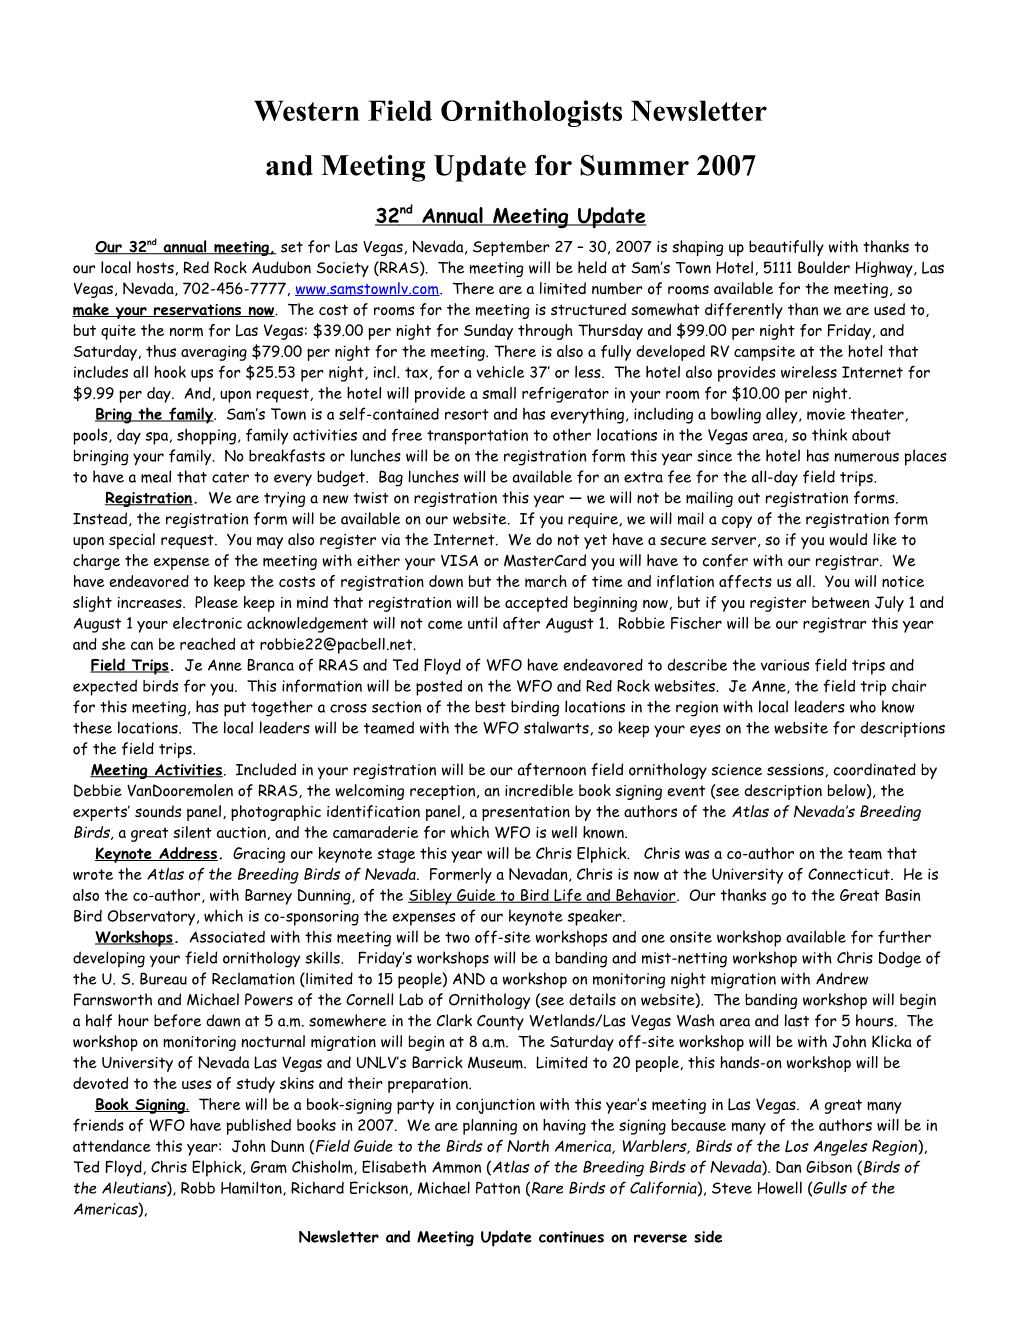 Western Field Ornithologists Newsletter & Meeting Update for Summer 2007